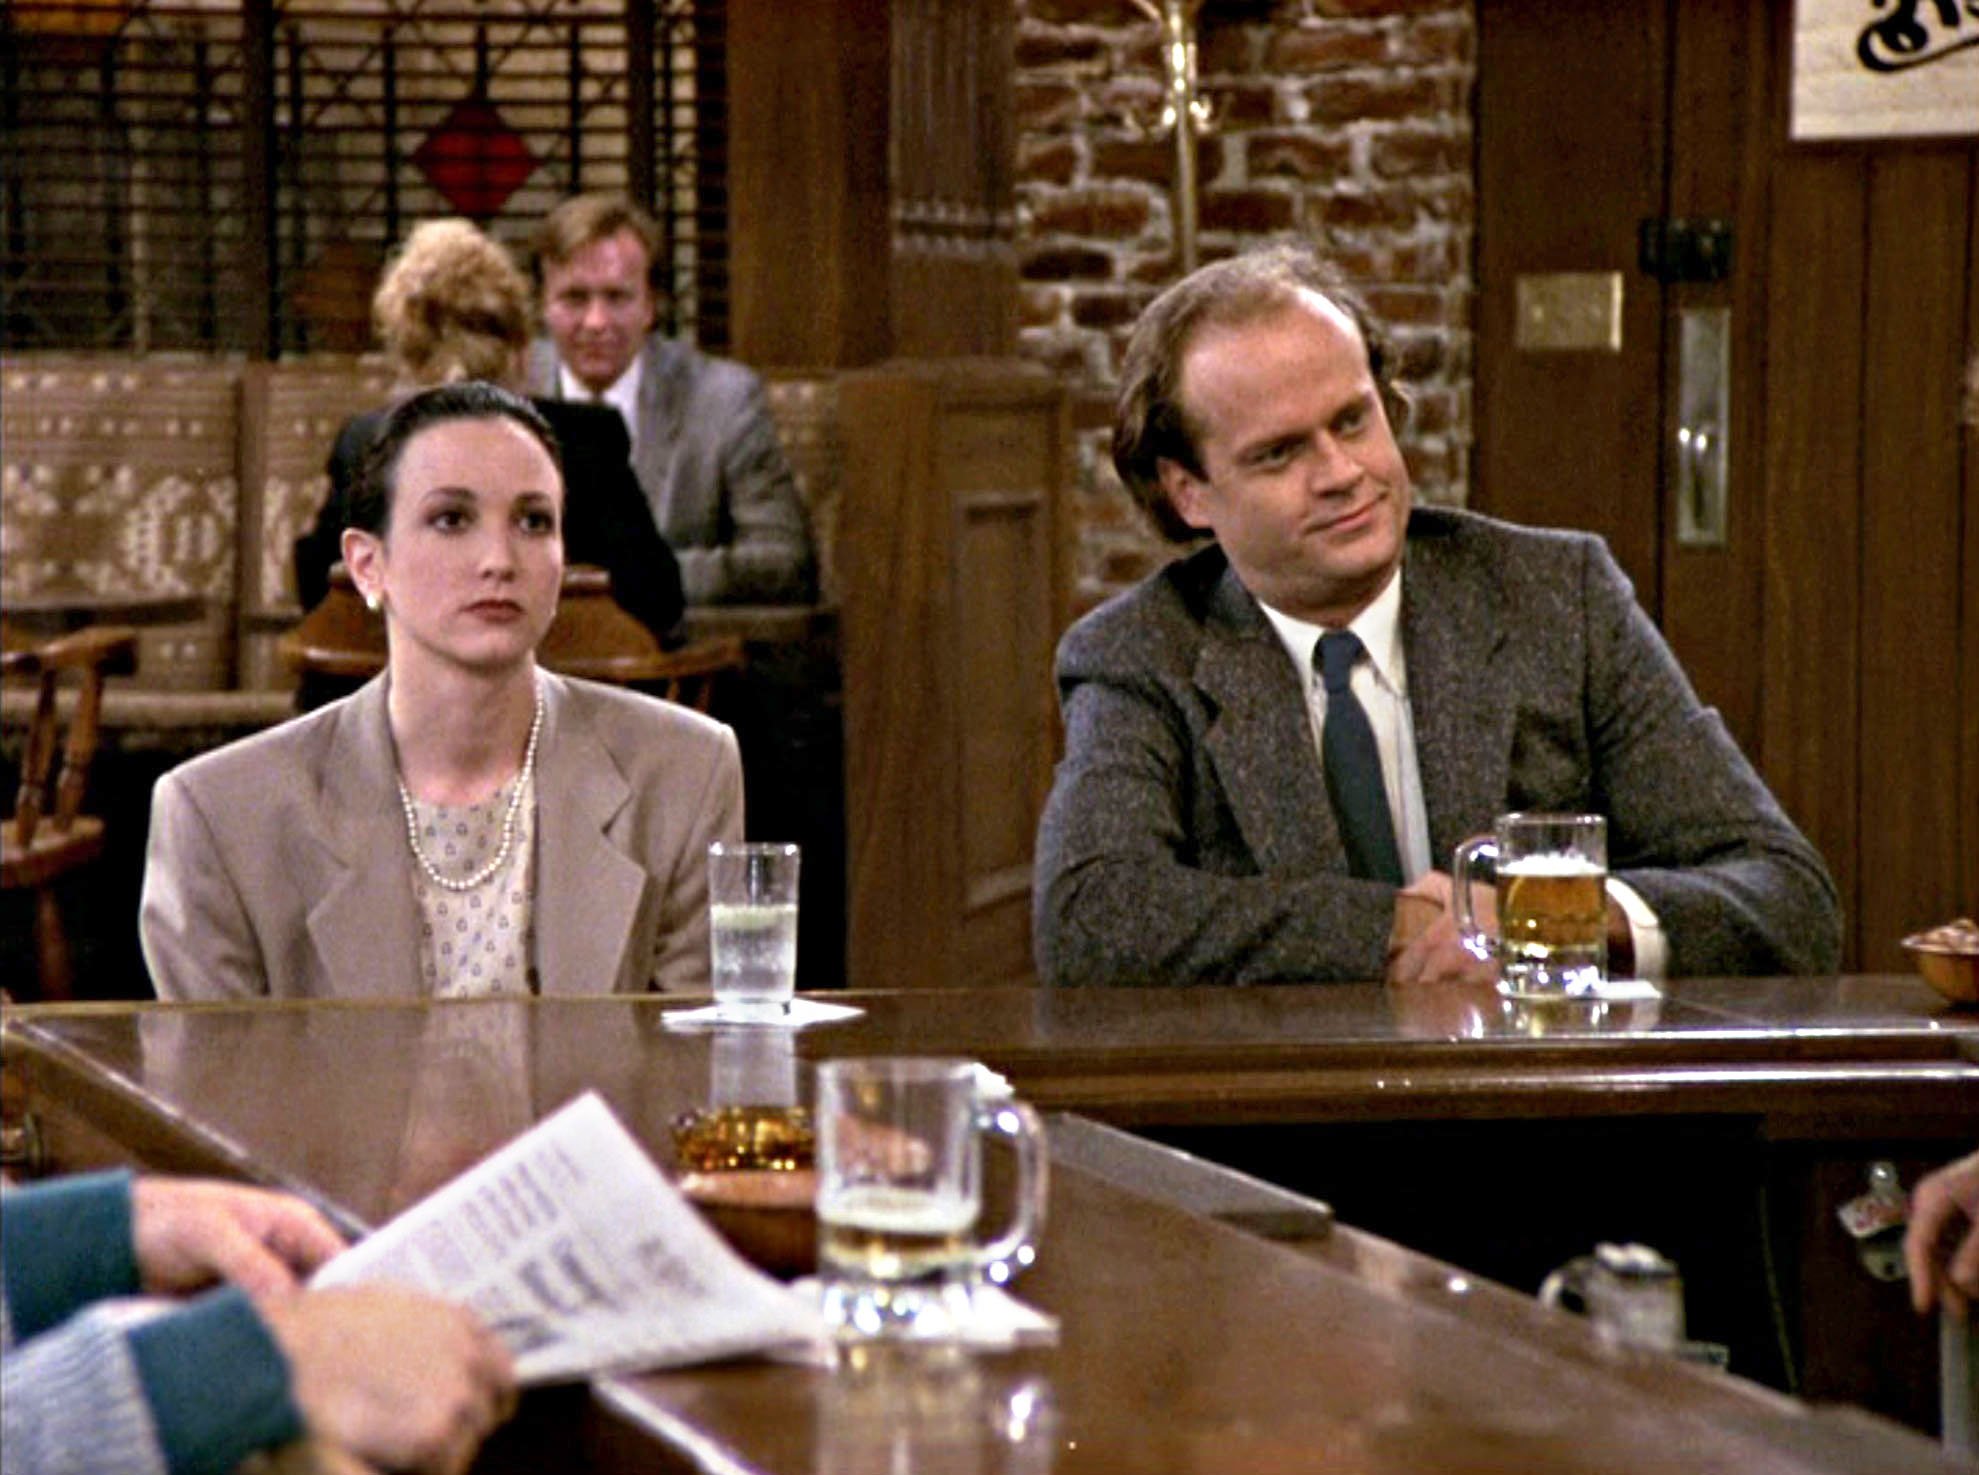 Bebe Neuwirth as Dr. Lilith Sternin and Kelsey Grammer as Dr. Frasier Crane in the "Cheers" episode 'A Bar is Born,'